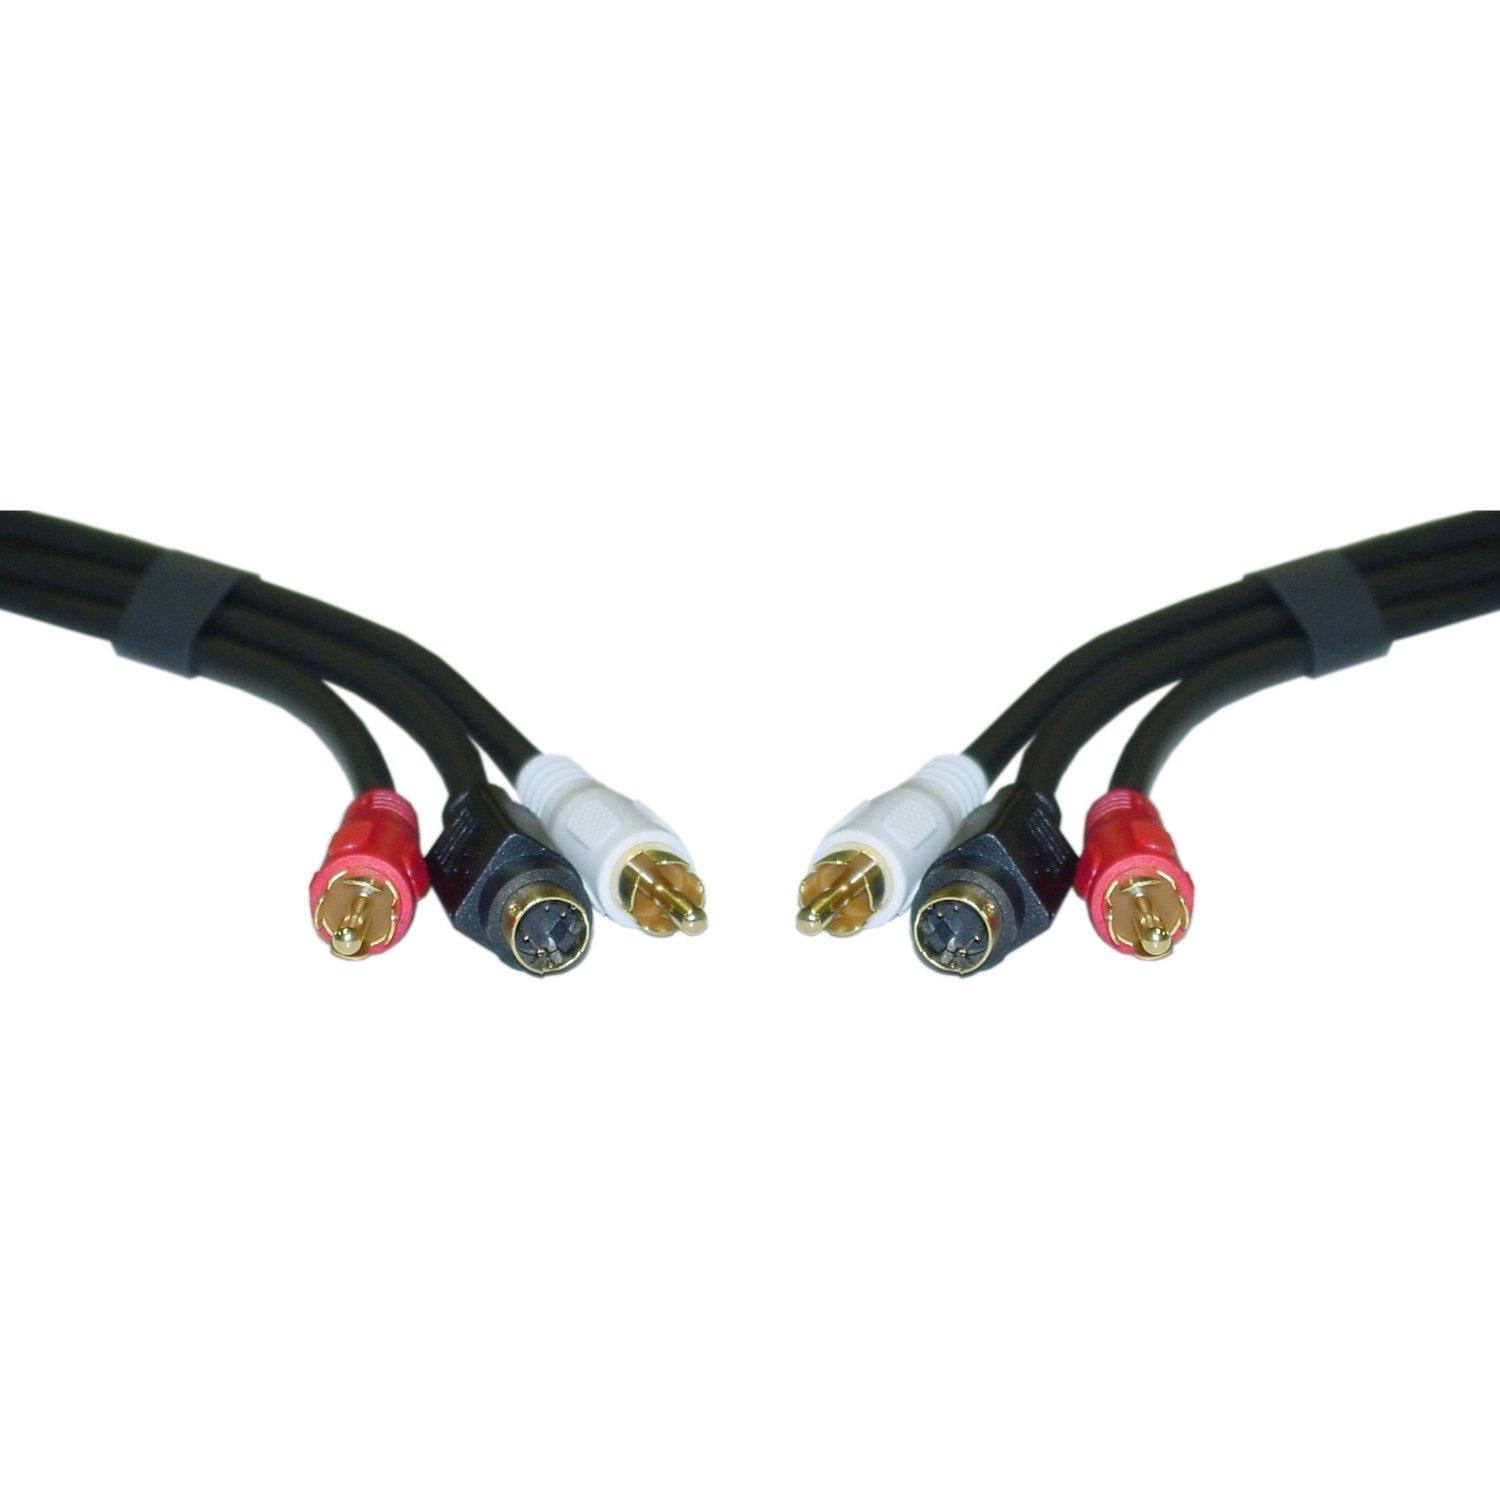 12ft S-Video and RCA Stereo Audio Cable, MiniDin4 Male and 2 RCA Male 10S2-03112